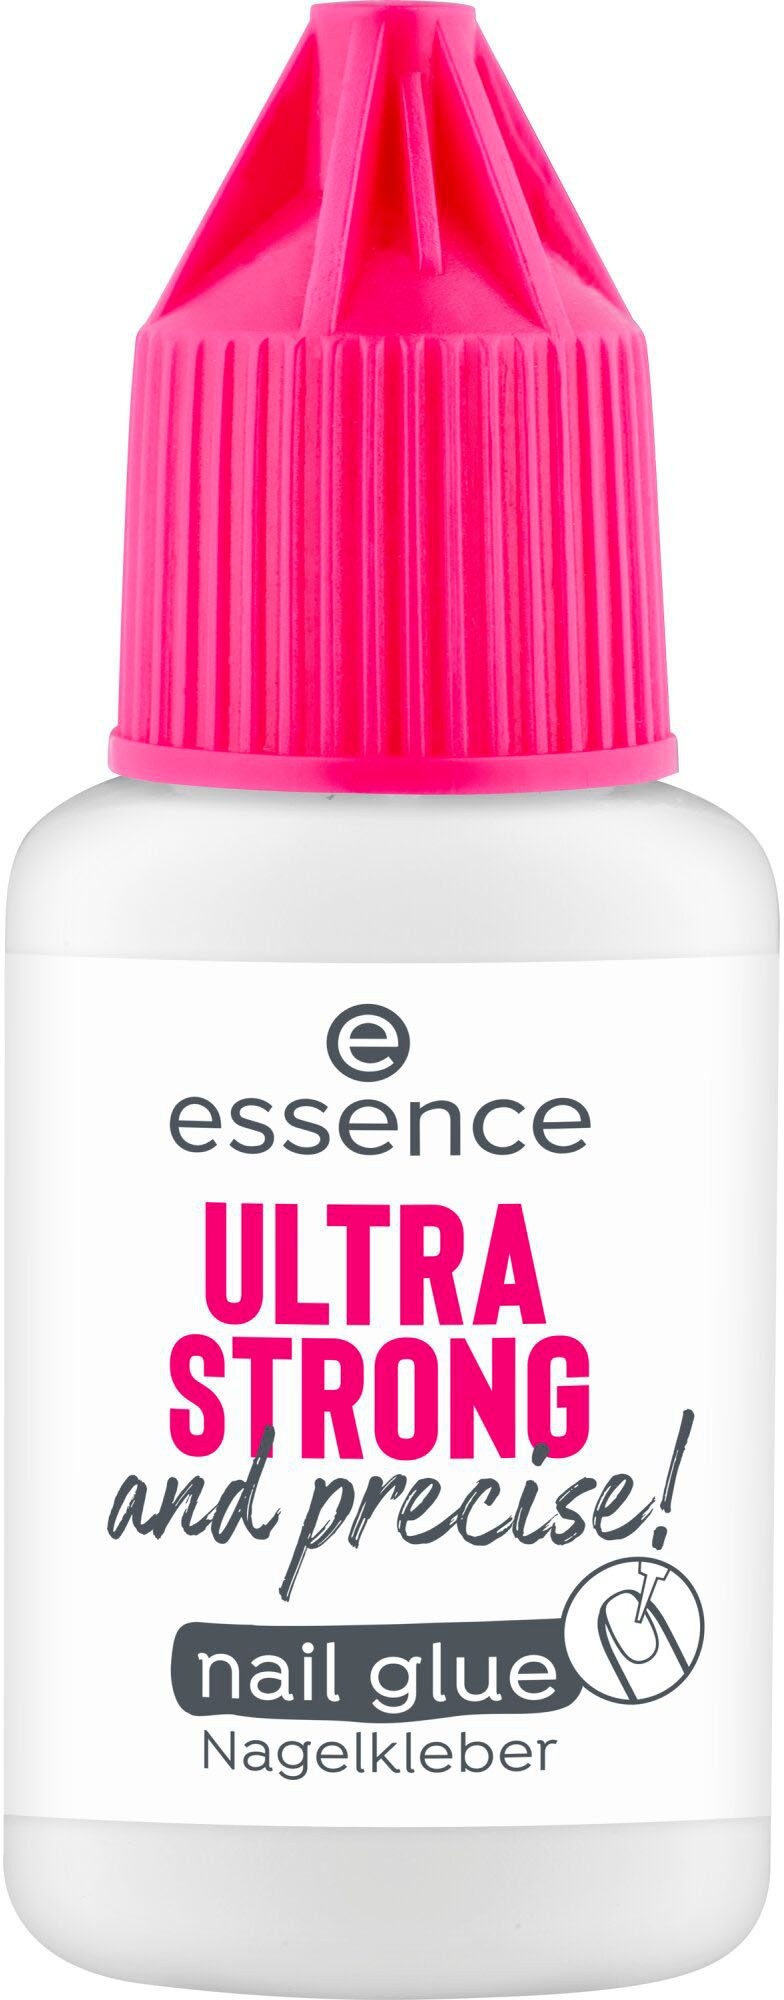 Essence Nagellack ULTRA STRONG and precise! nail glue